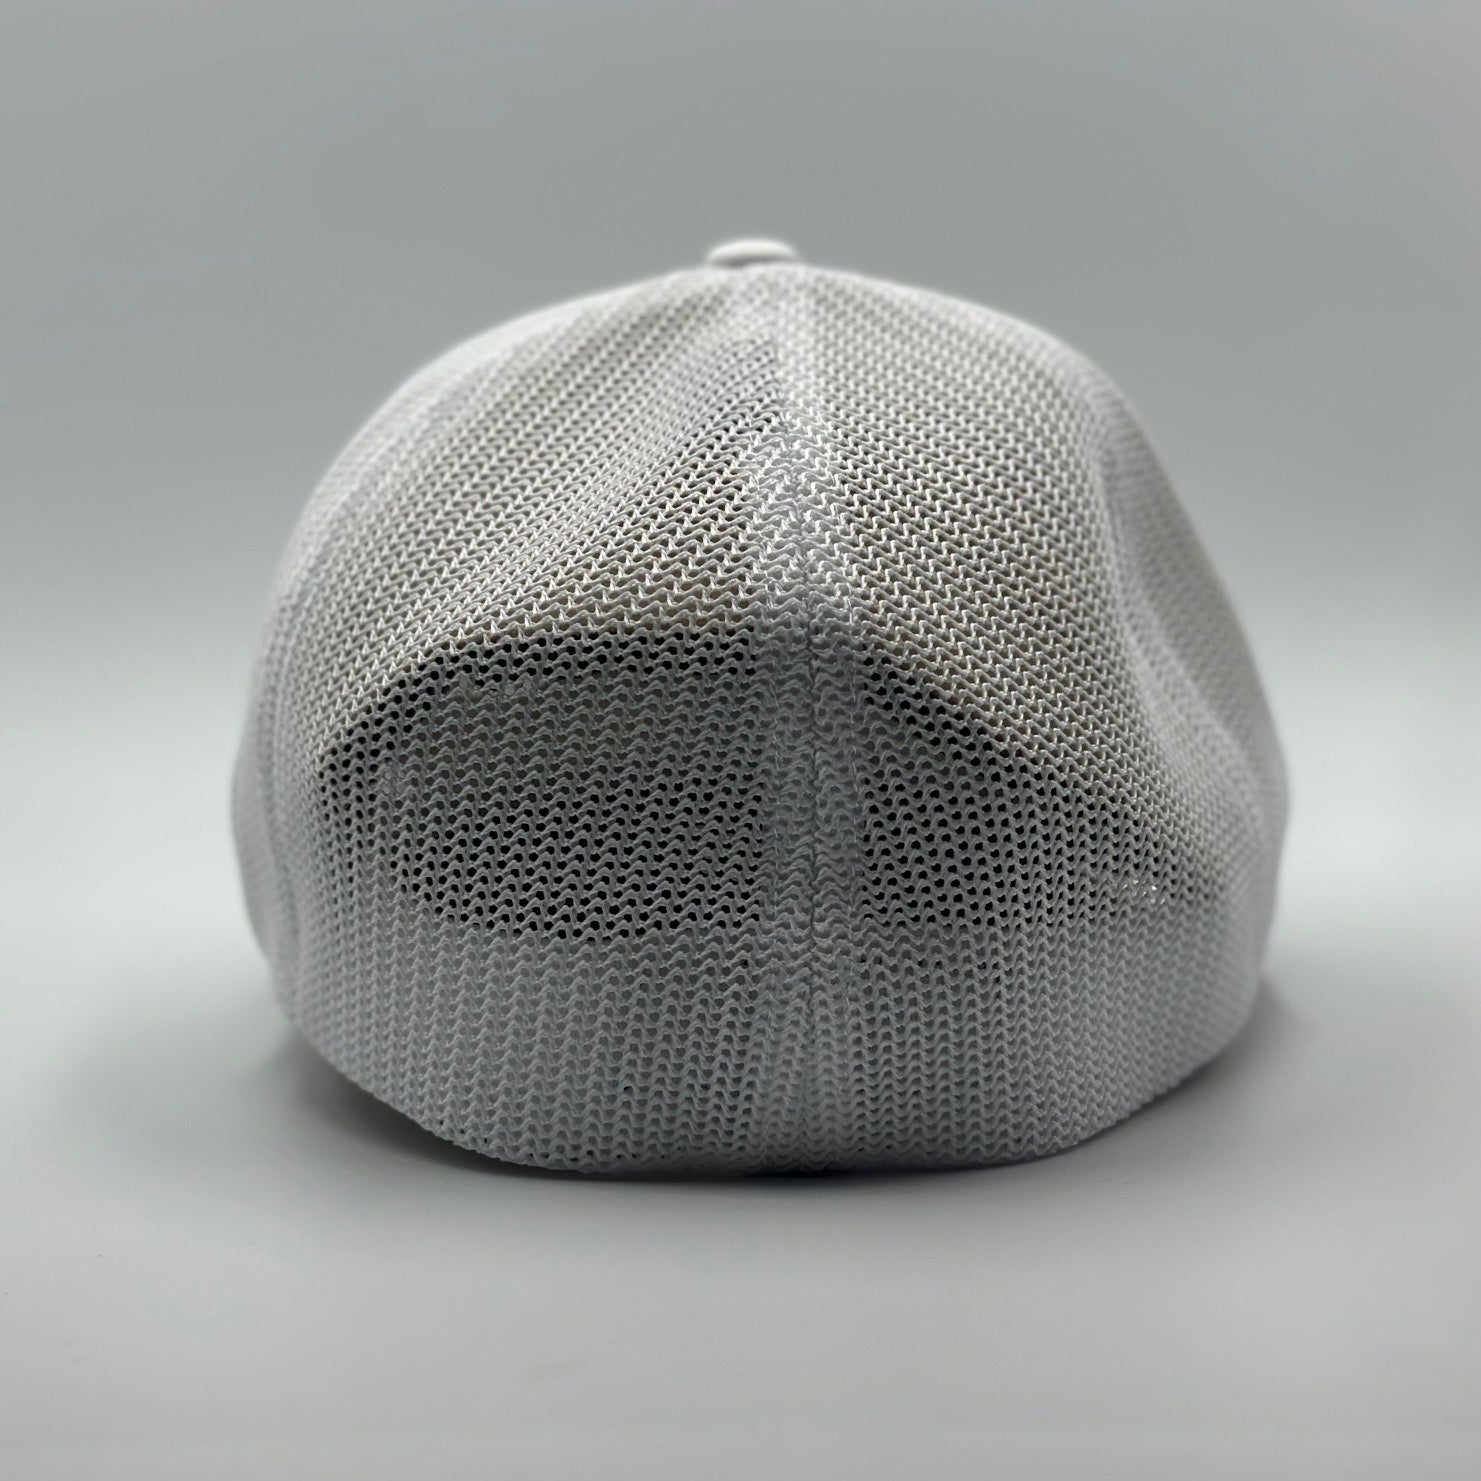 White Flex Hat With Sliver Patch